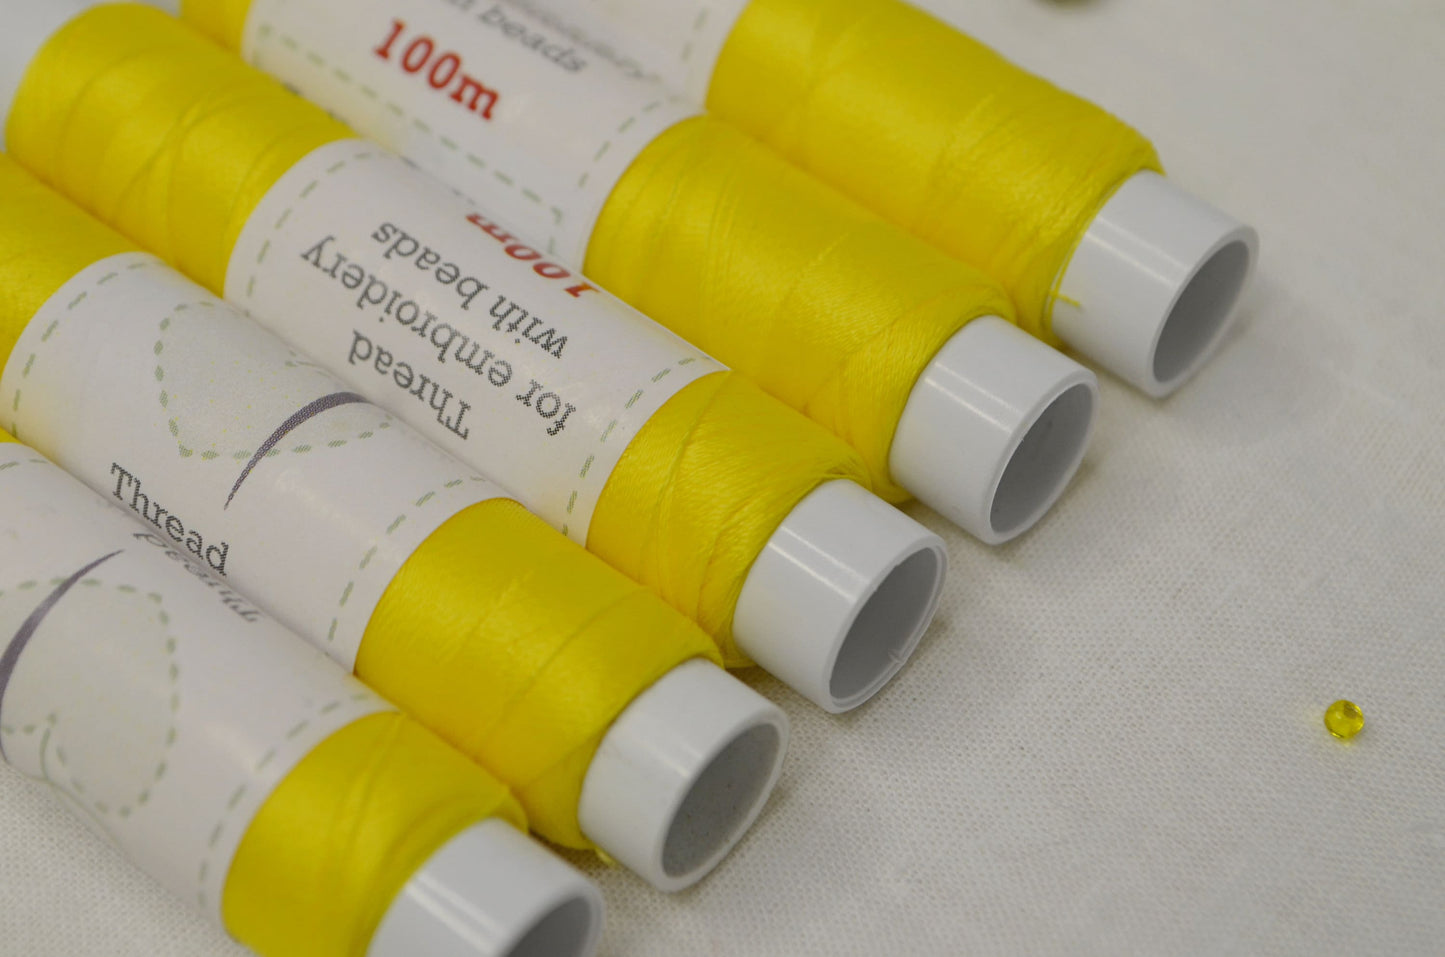 Yellow Thread 100m spools,100% polyester, Set of 5 or 10 pcs one colors, Beading embroidery threads, Sew-on rhinestones, Needlework material